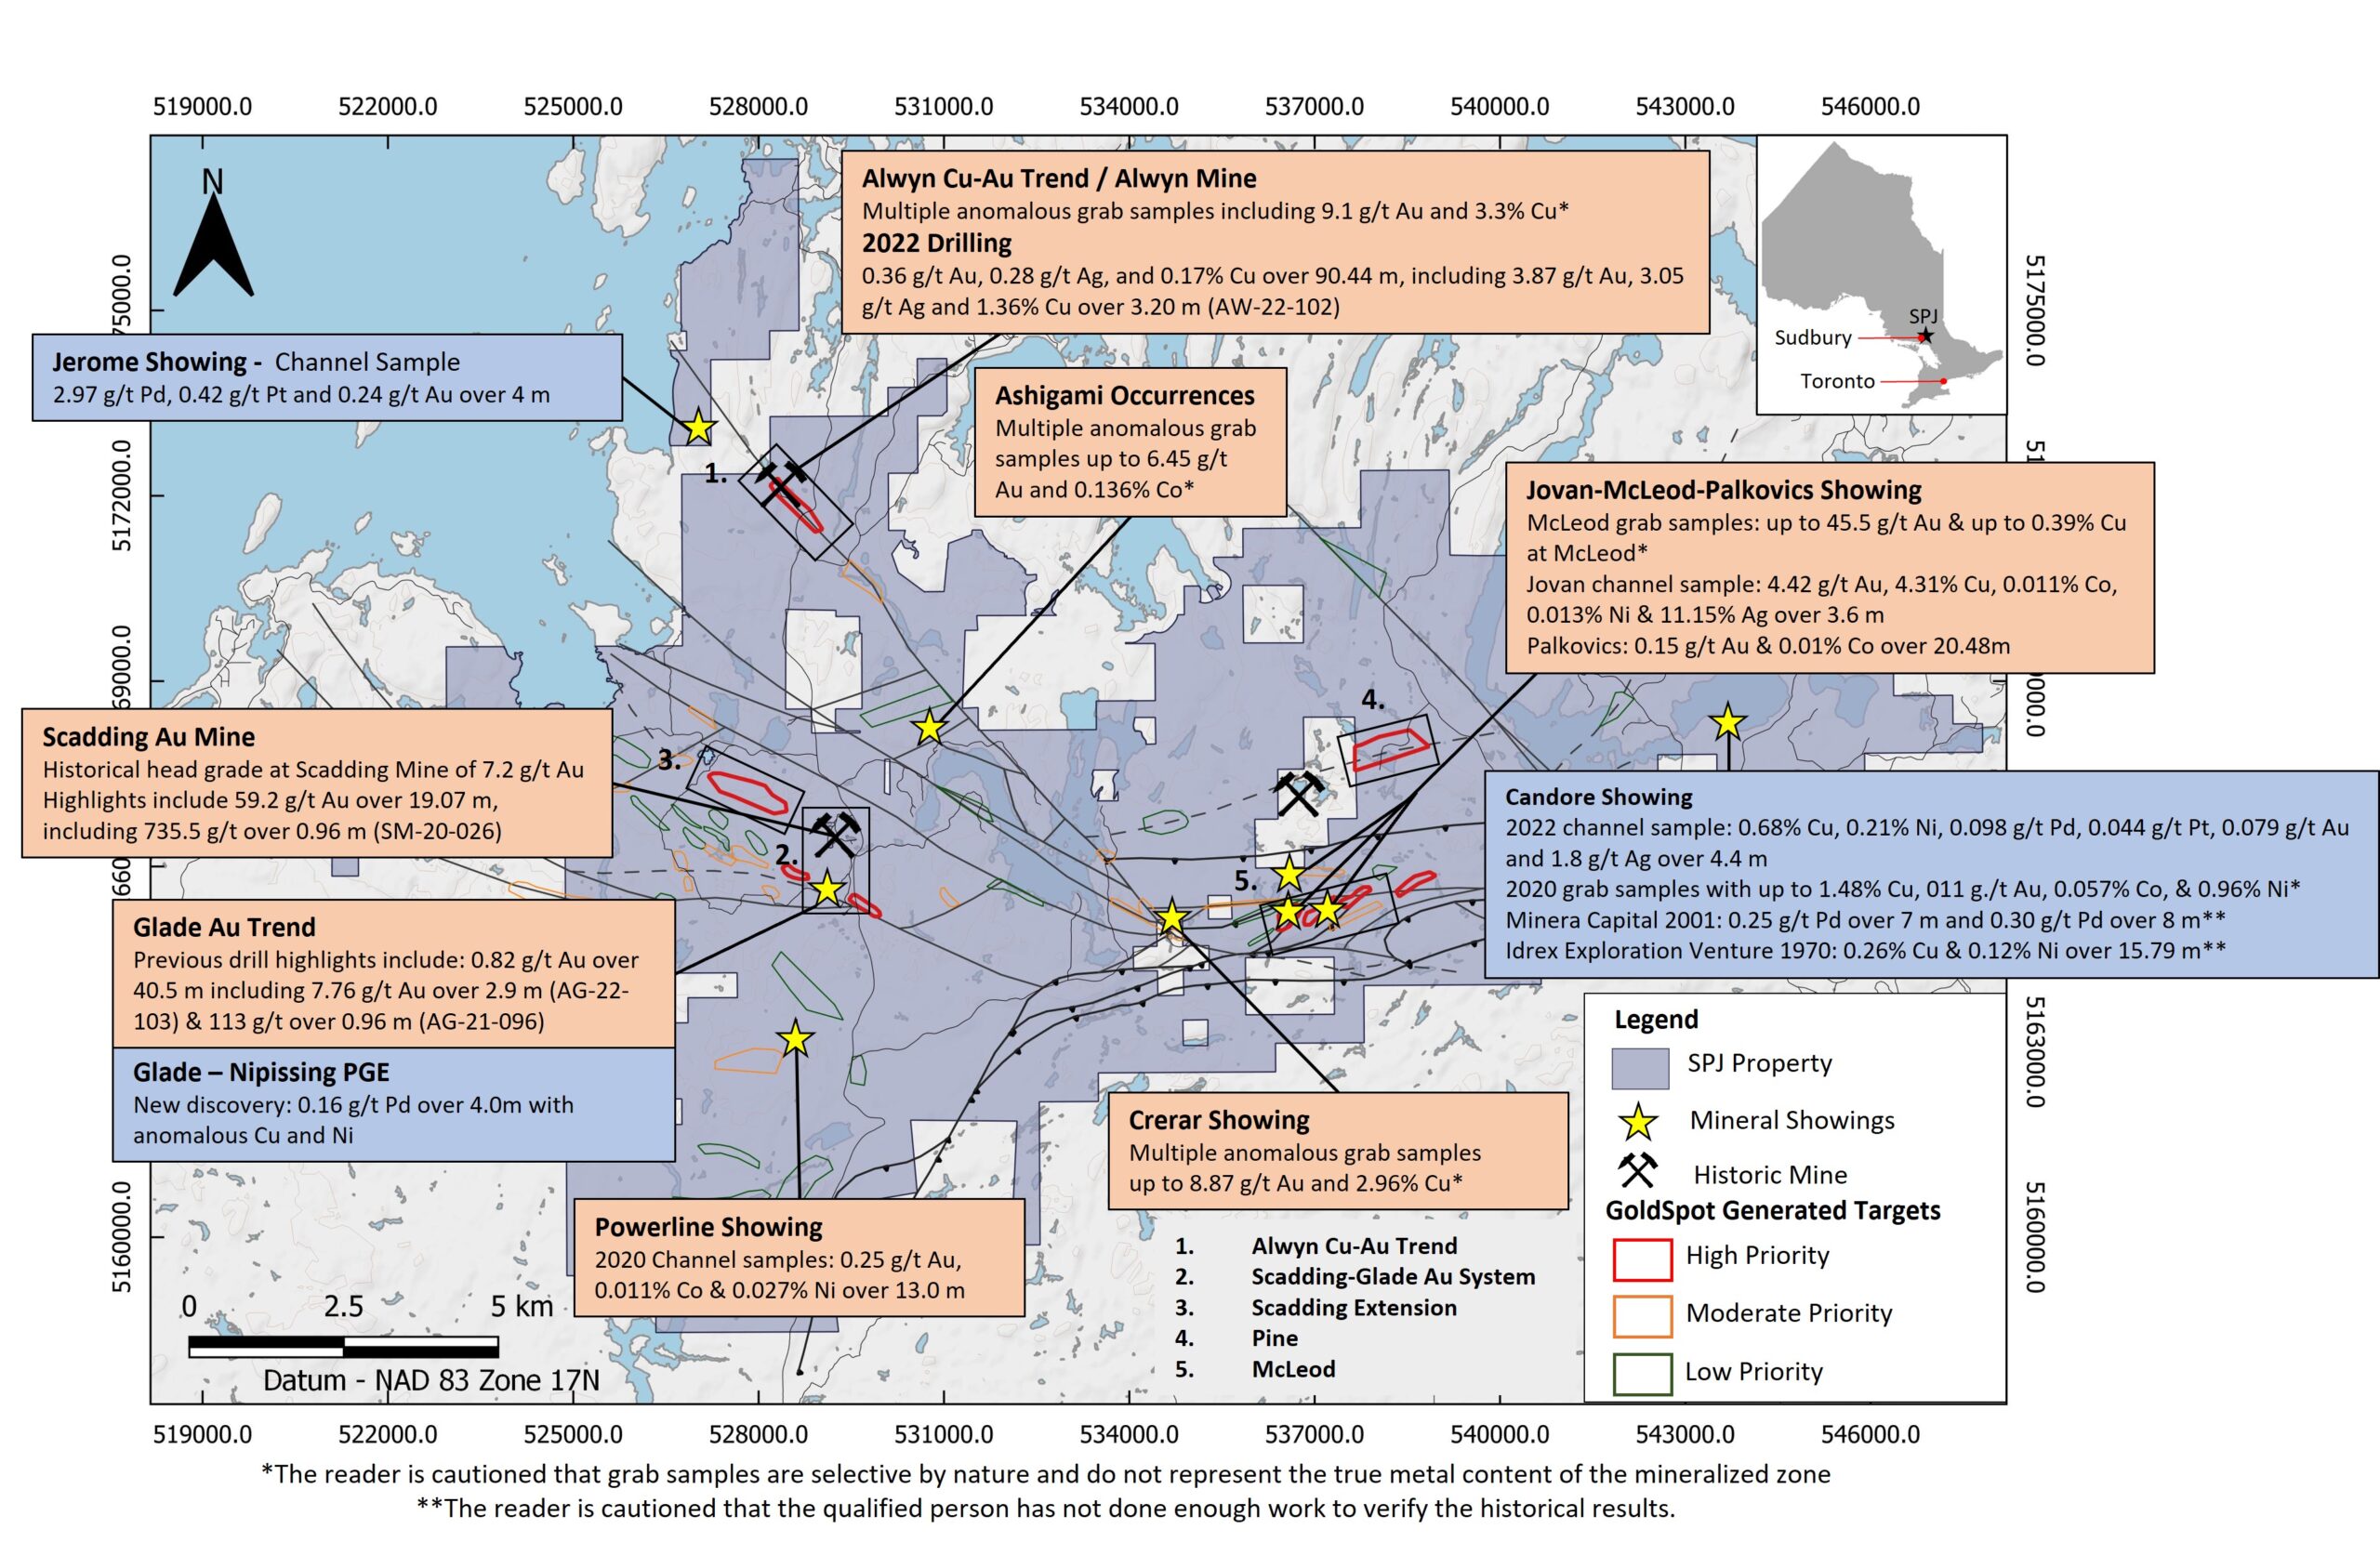 Different centres of mineralization present on the SPJ Property. Orange text boxes indicate mineralization zones related with the MIAC system and blue text boxes indicate magmatic Ni-Cu-PGE mineralization zones related to the Nipissing intrusive suite.